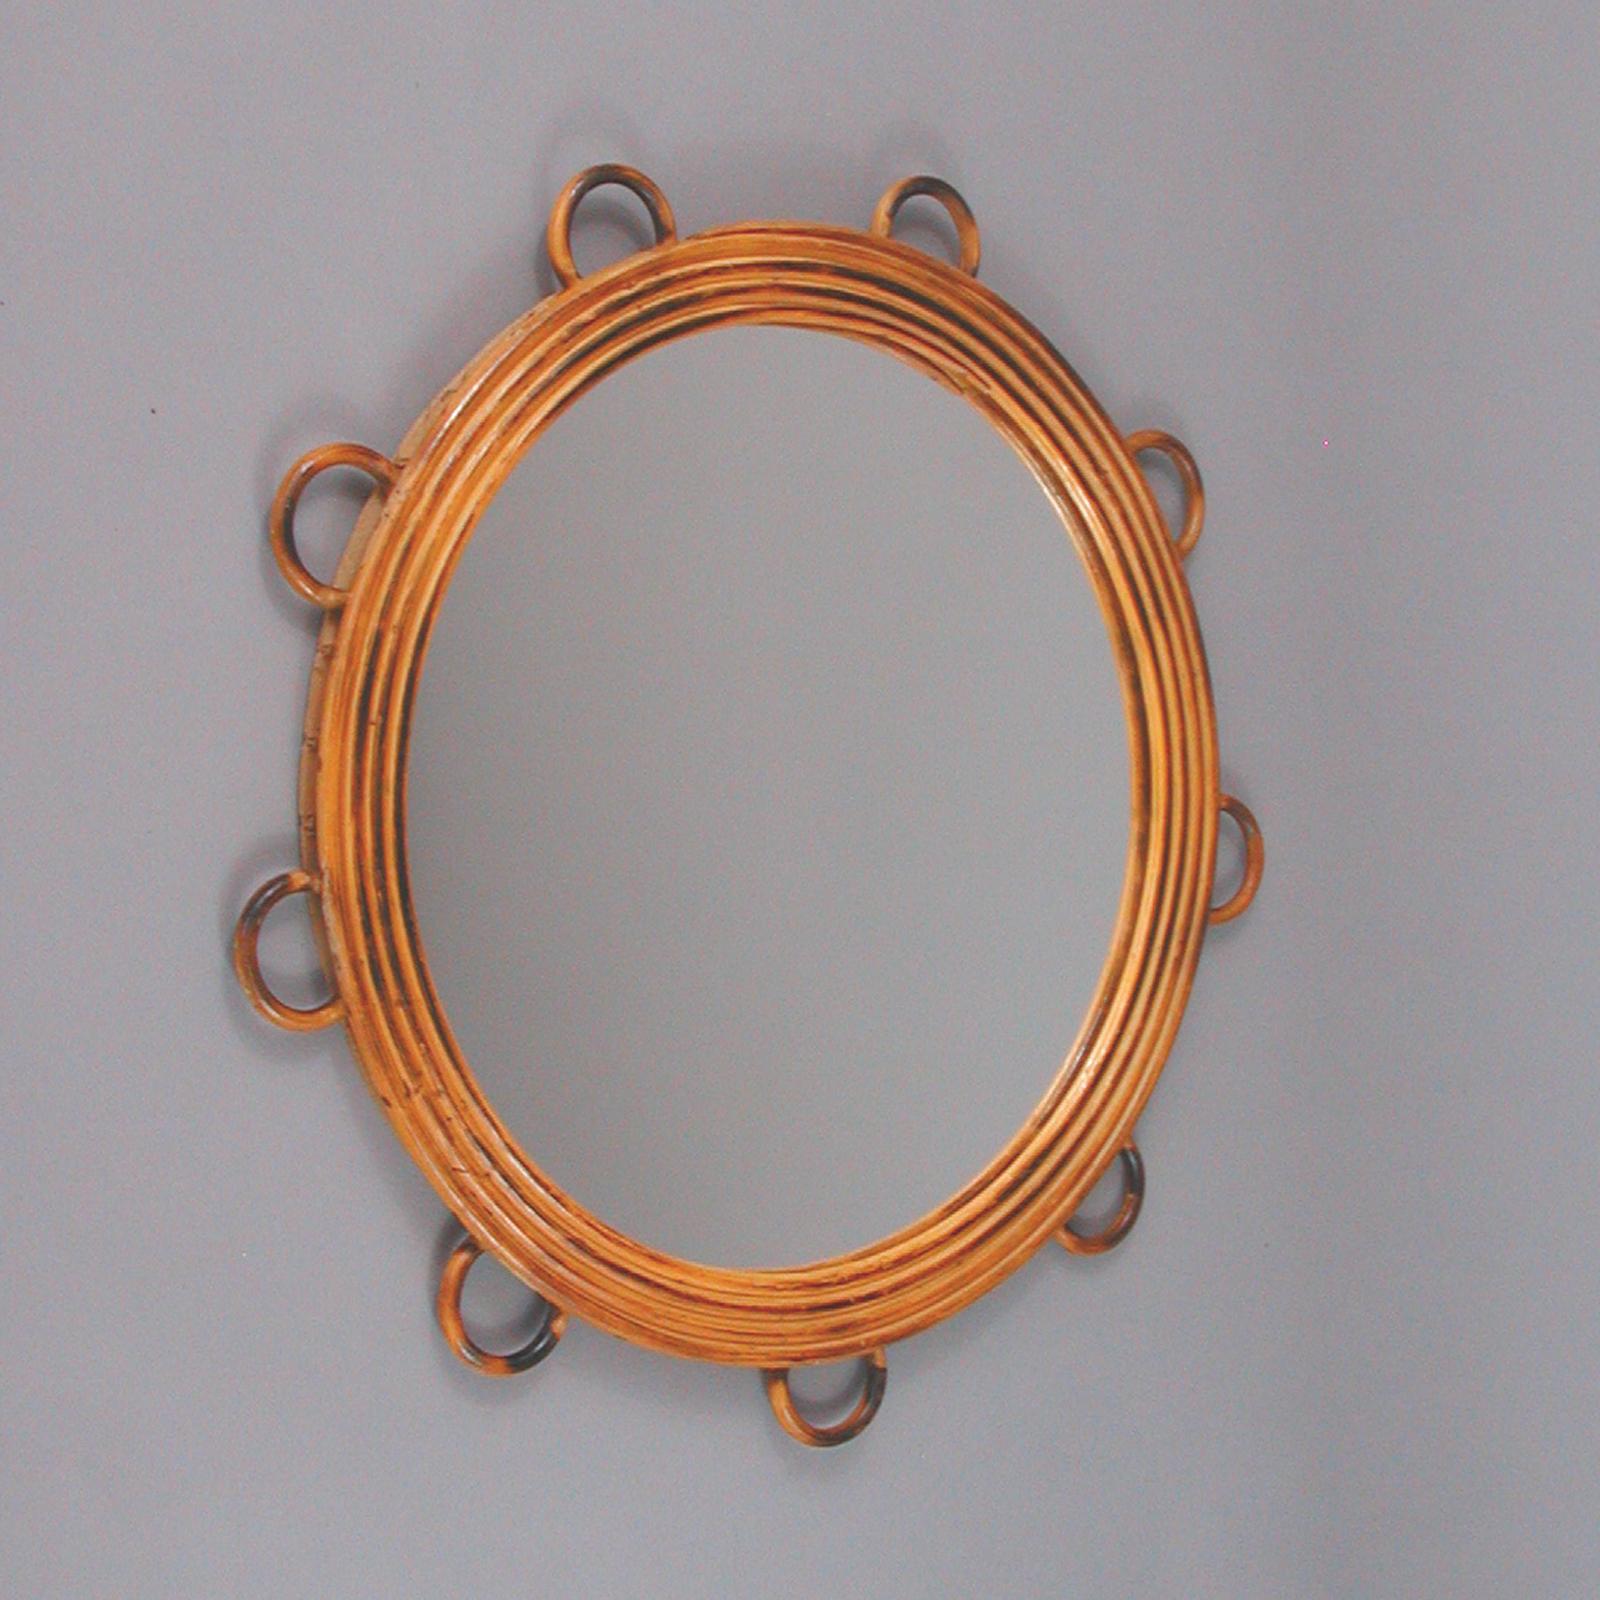 This vintage Franco Albini style wall mirror was designed and manufactured in Italy in the 1950s. It features a loop rattan round frame and mirror glass.

Condition is very good with few signs of use and age. Rattan with some minor wear but no